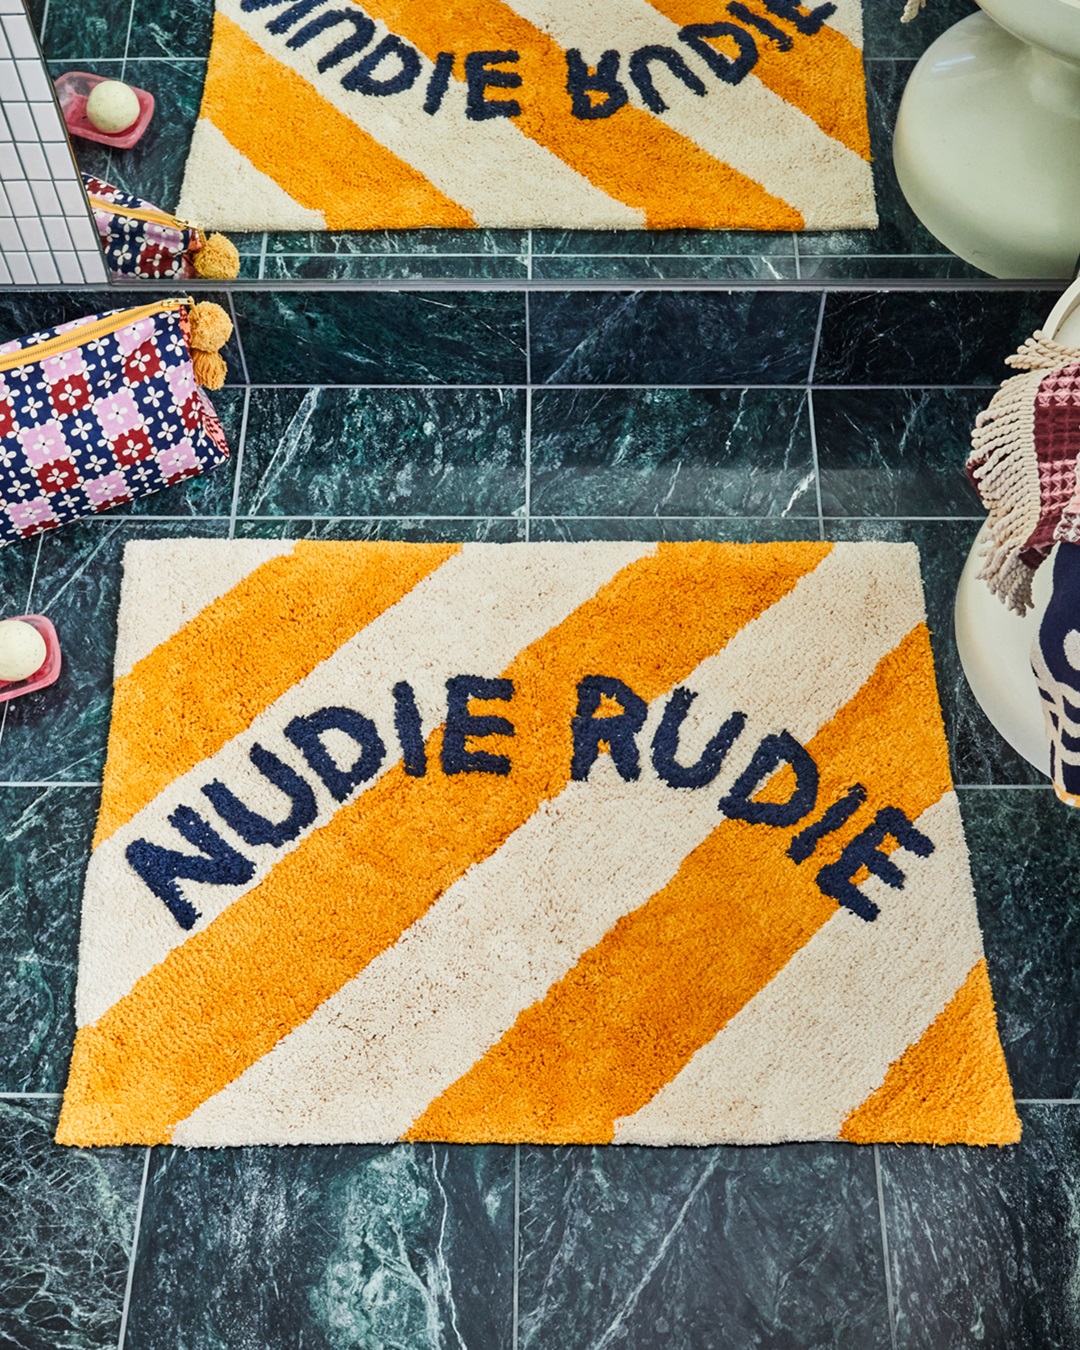 Gold and white stripe bath mat with Nudie Rudie on tiled floor